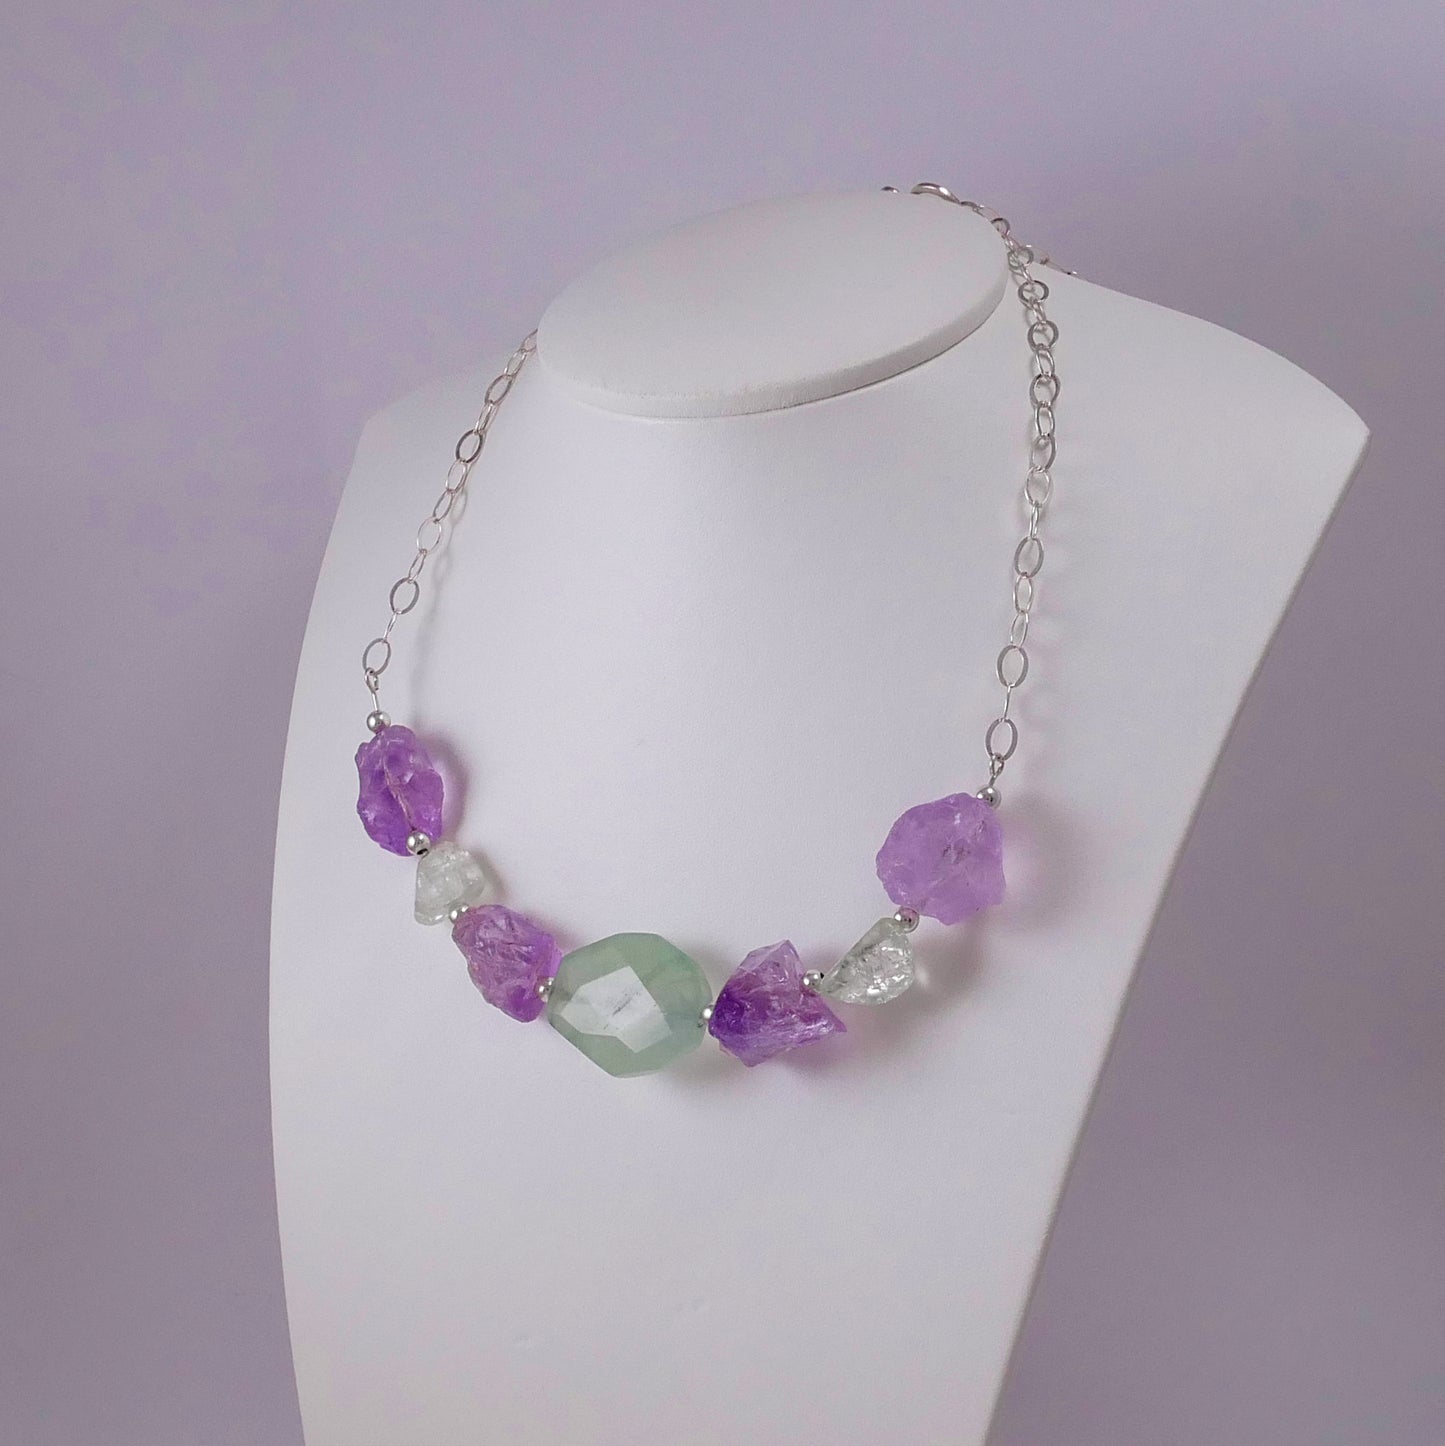 Raw Amethysts, Fluorite, Quartz, and Sterling Silver Necklace - Katerina Roukouna